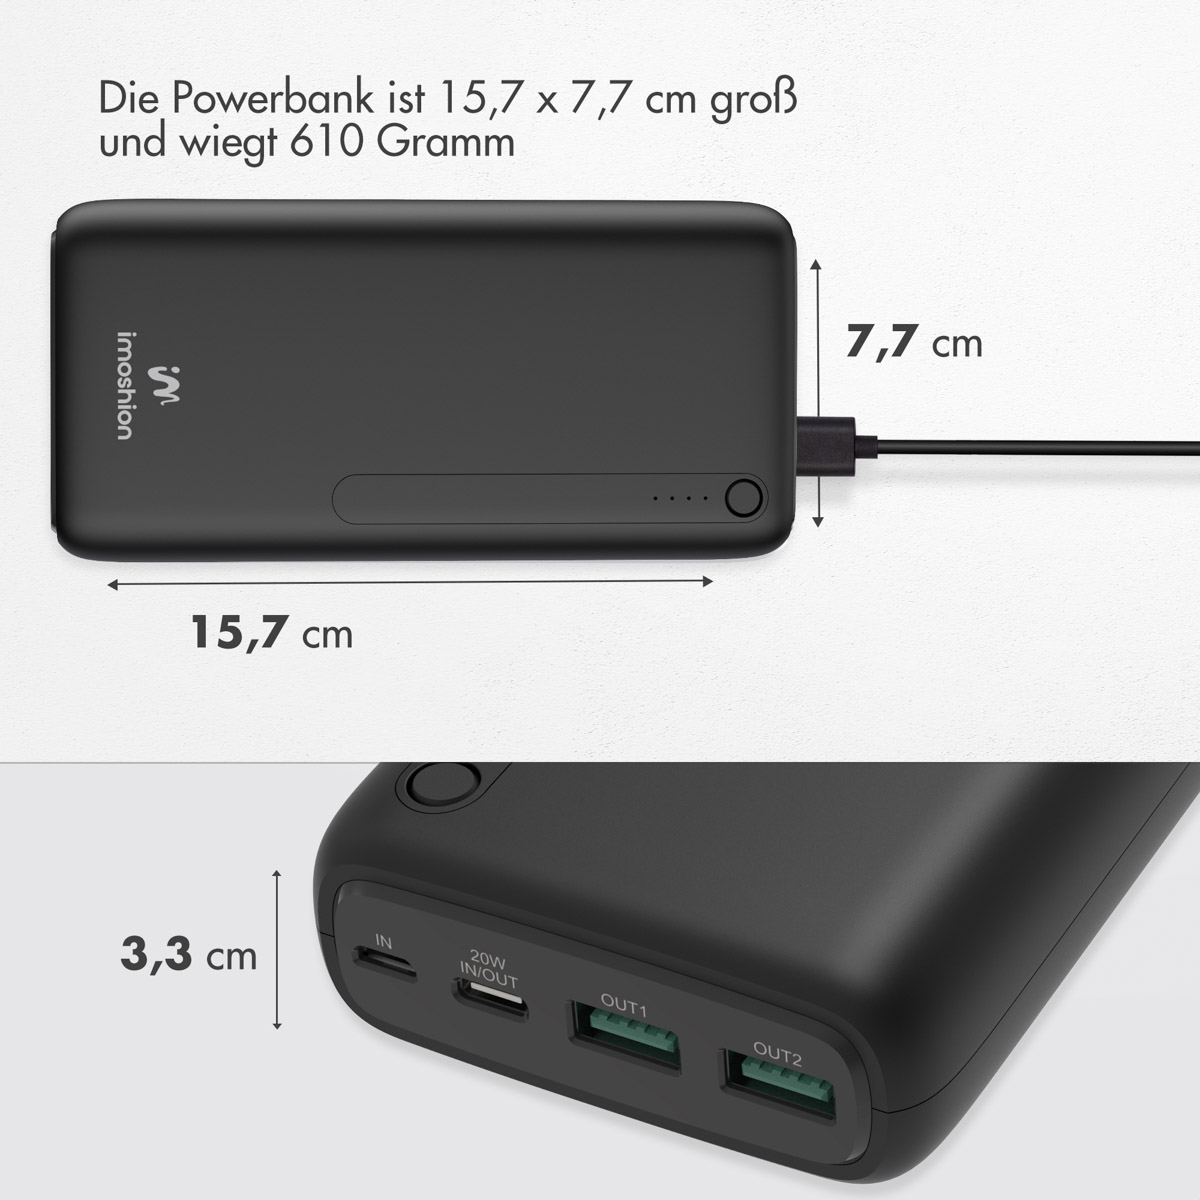 IMOSHION Power Delivery & mAh Schwarz Quick Charge 27000 Powerbank